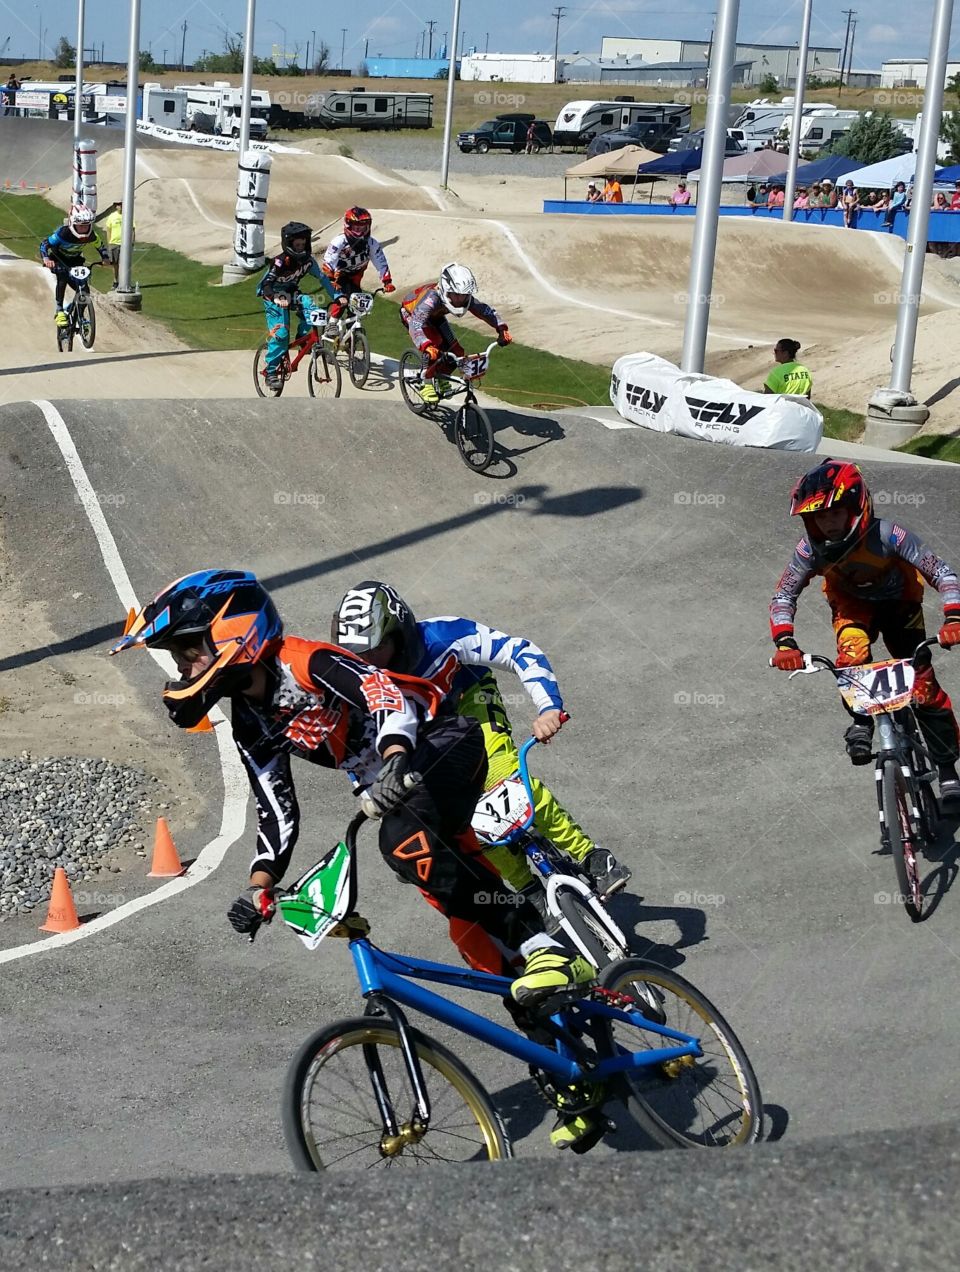 Youths Racing BMX Bikes on Outdoor Race Track During Competition